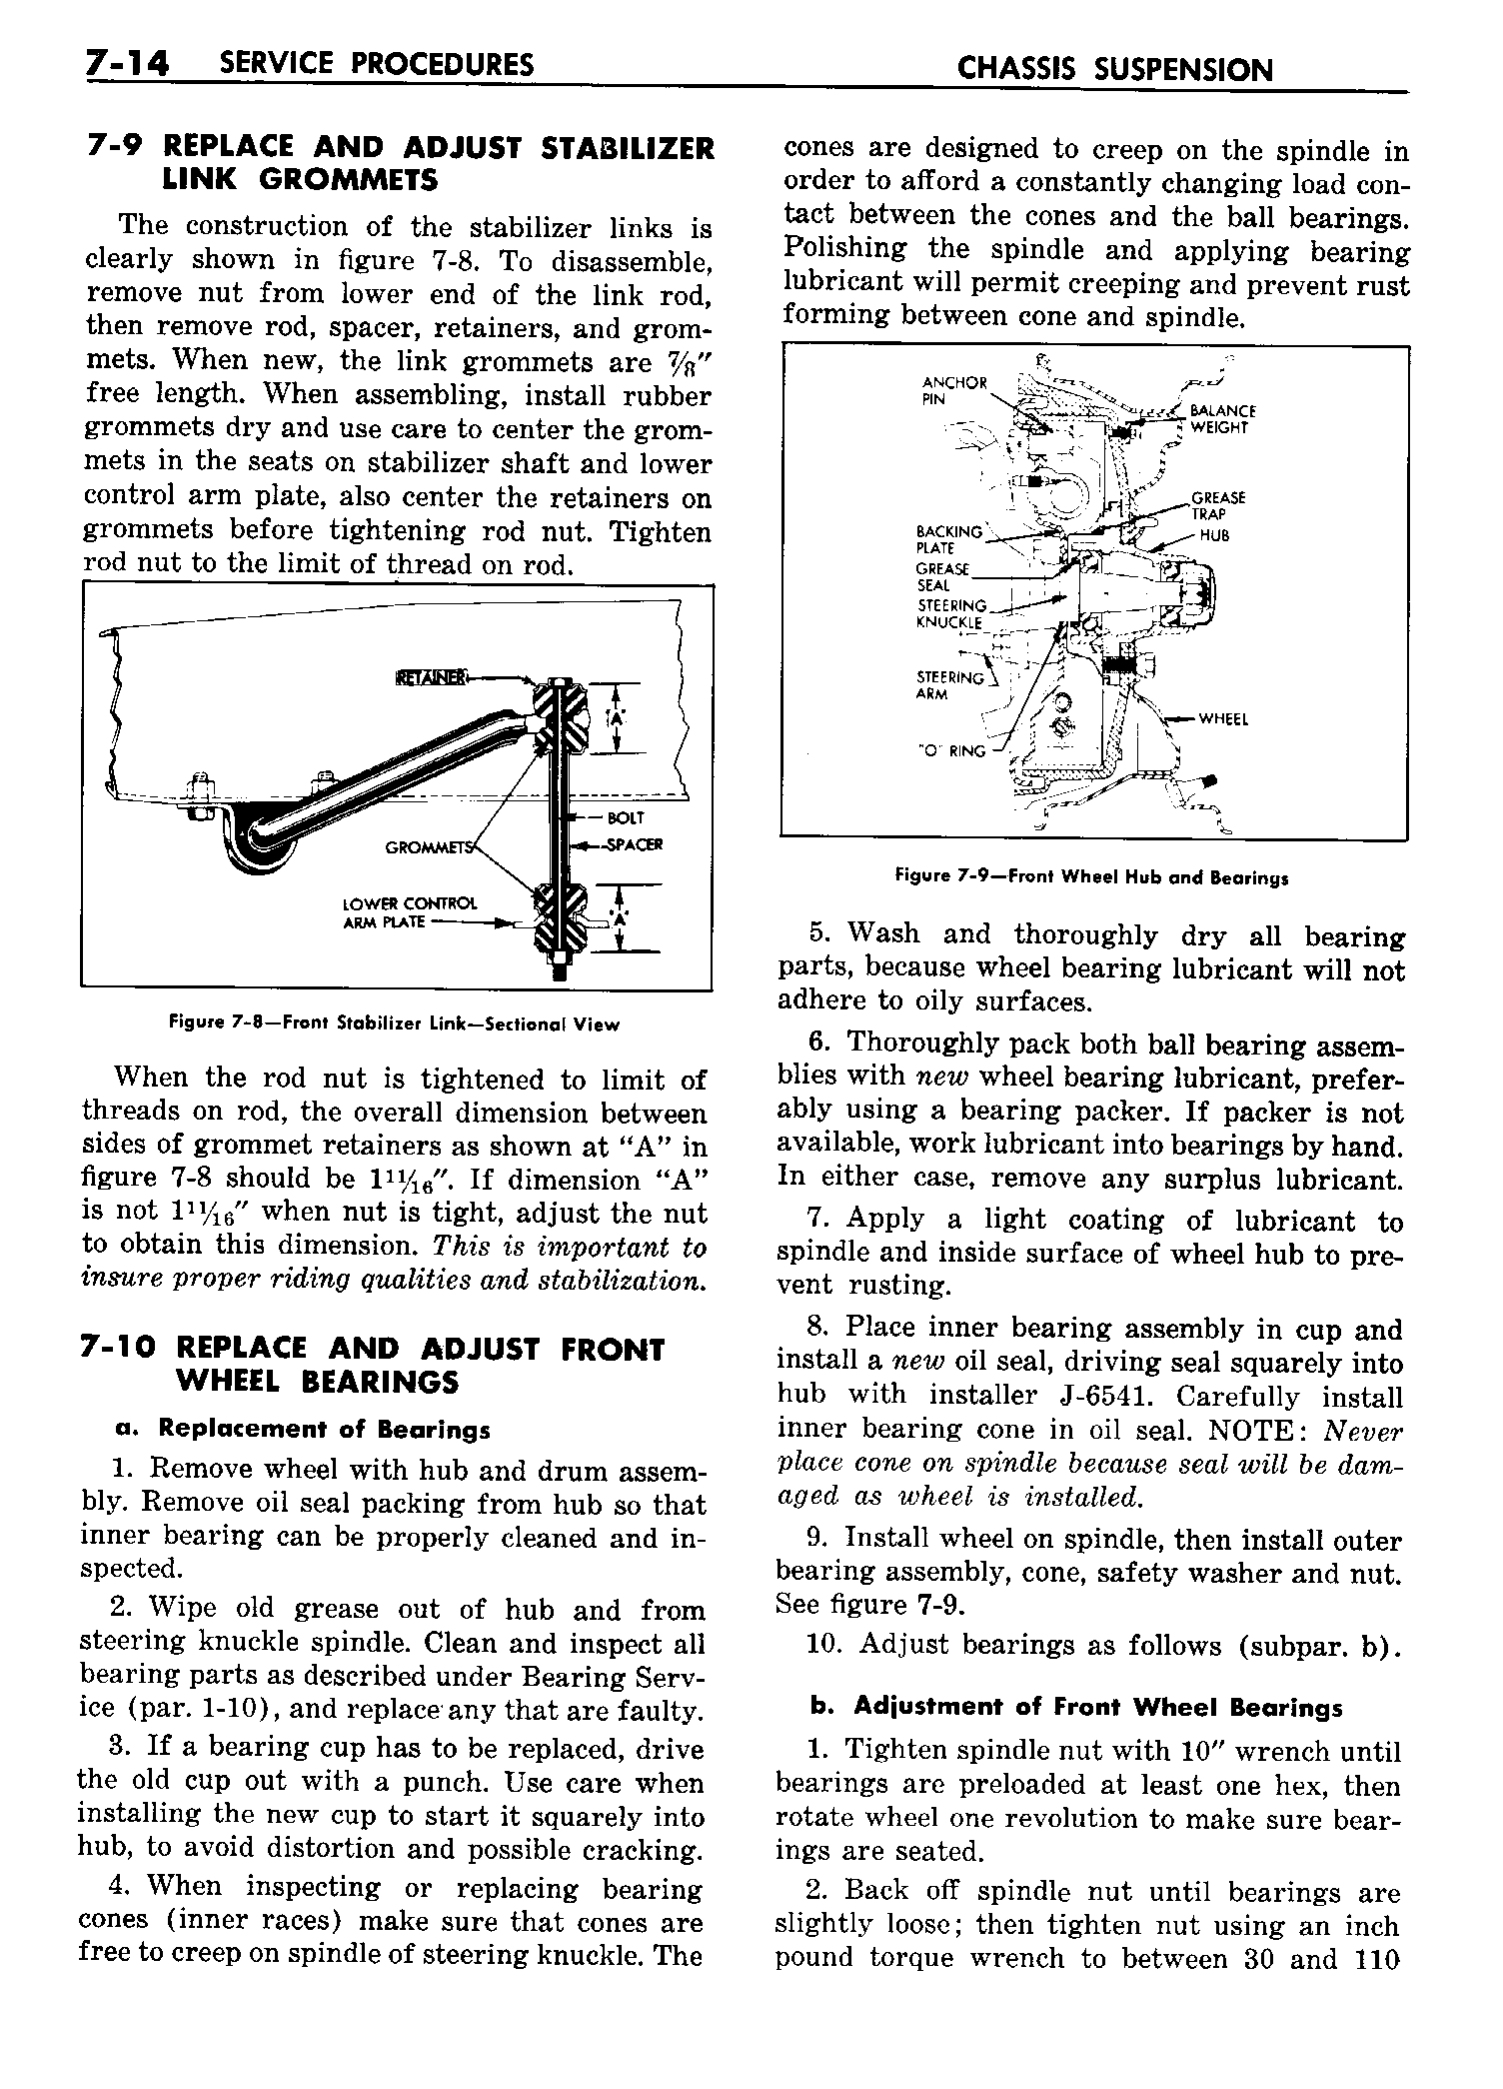 n_08 1958 Buick Shop Manual - Chassis Suspension_14.jpg